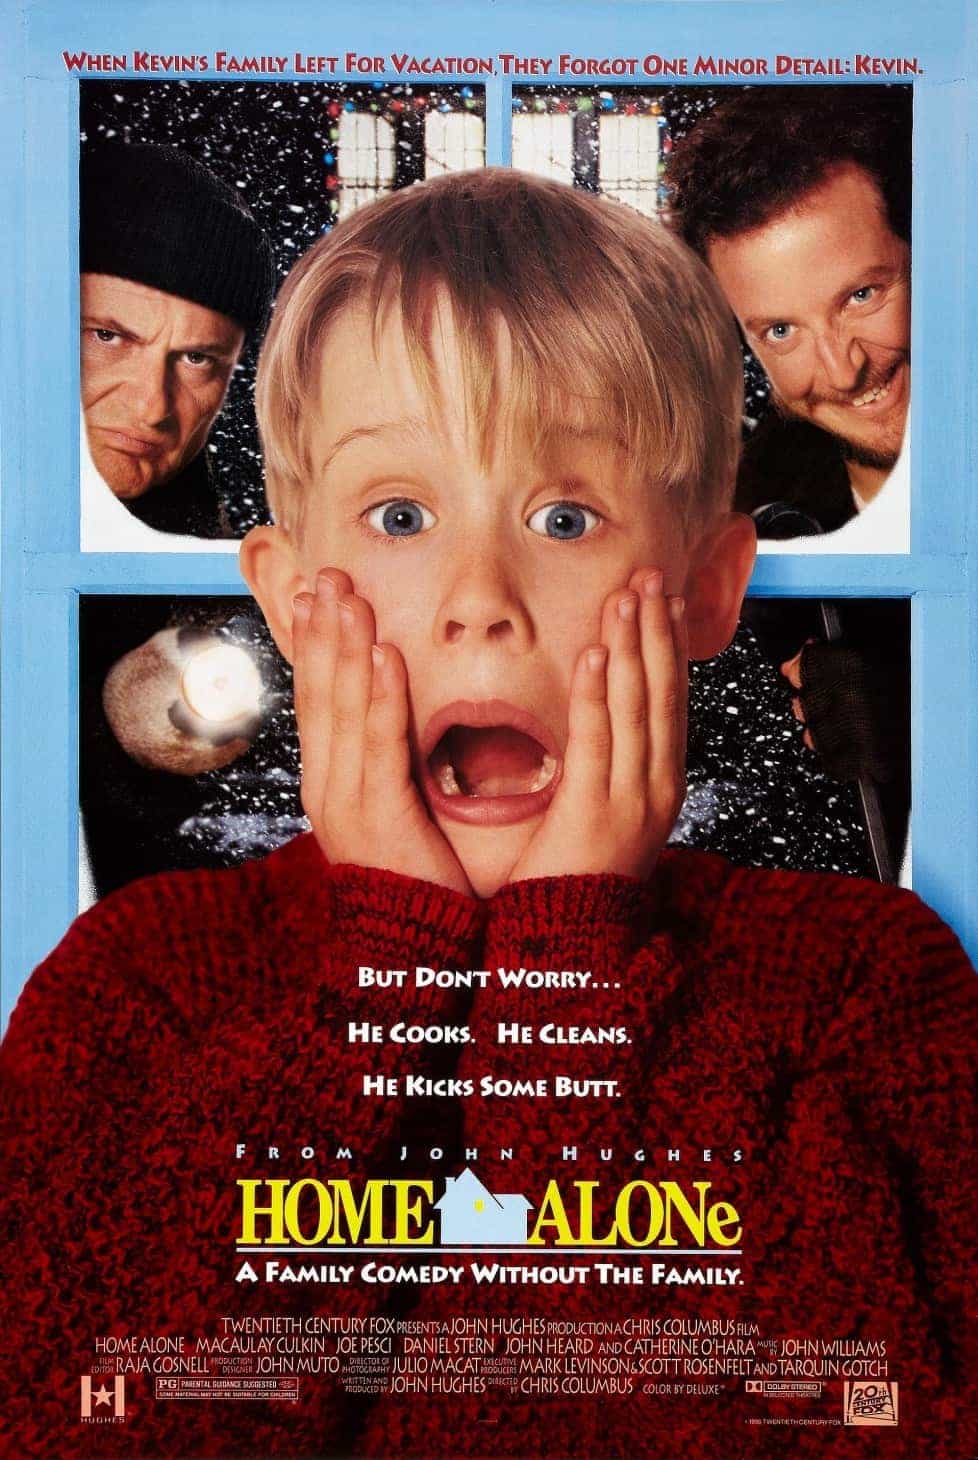 UK Box Office Weekend Report 27th - 29th November 2020:  30 year old movie Home Alone re-enters the UK box office at the top